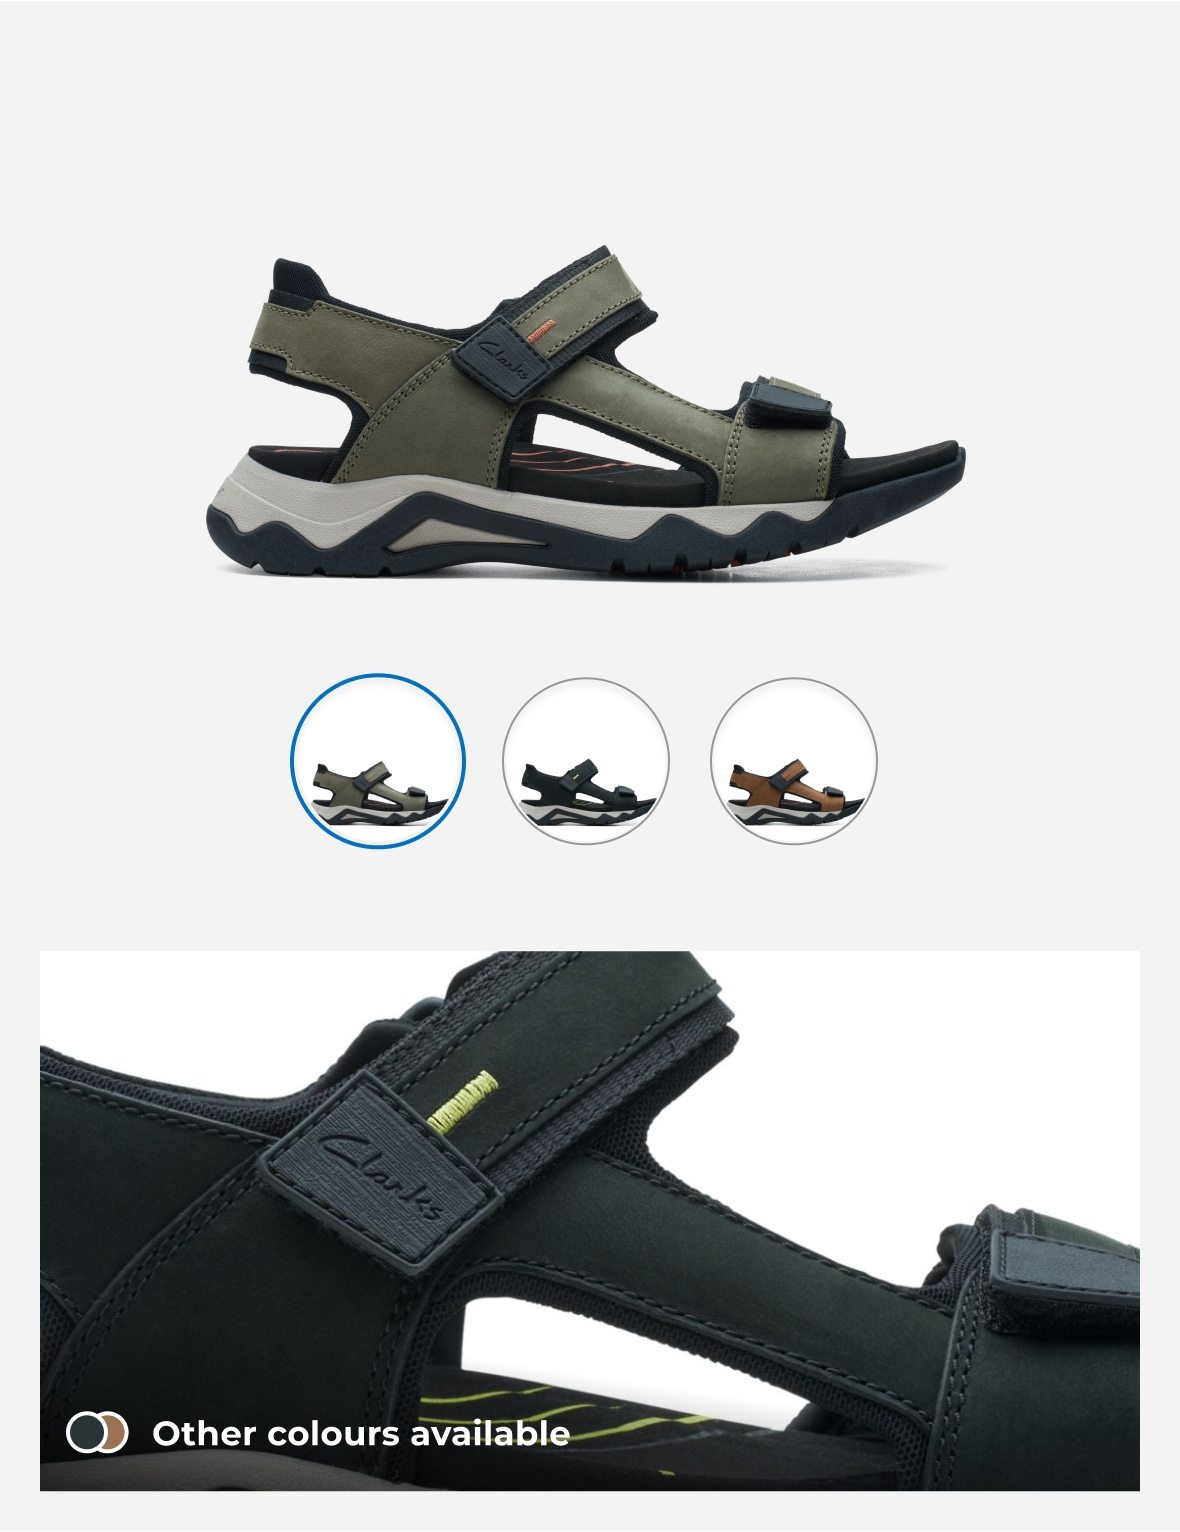 images of mens sandal Wave 2.0 Jump in 3 colours links to search results page